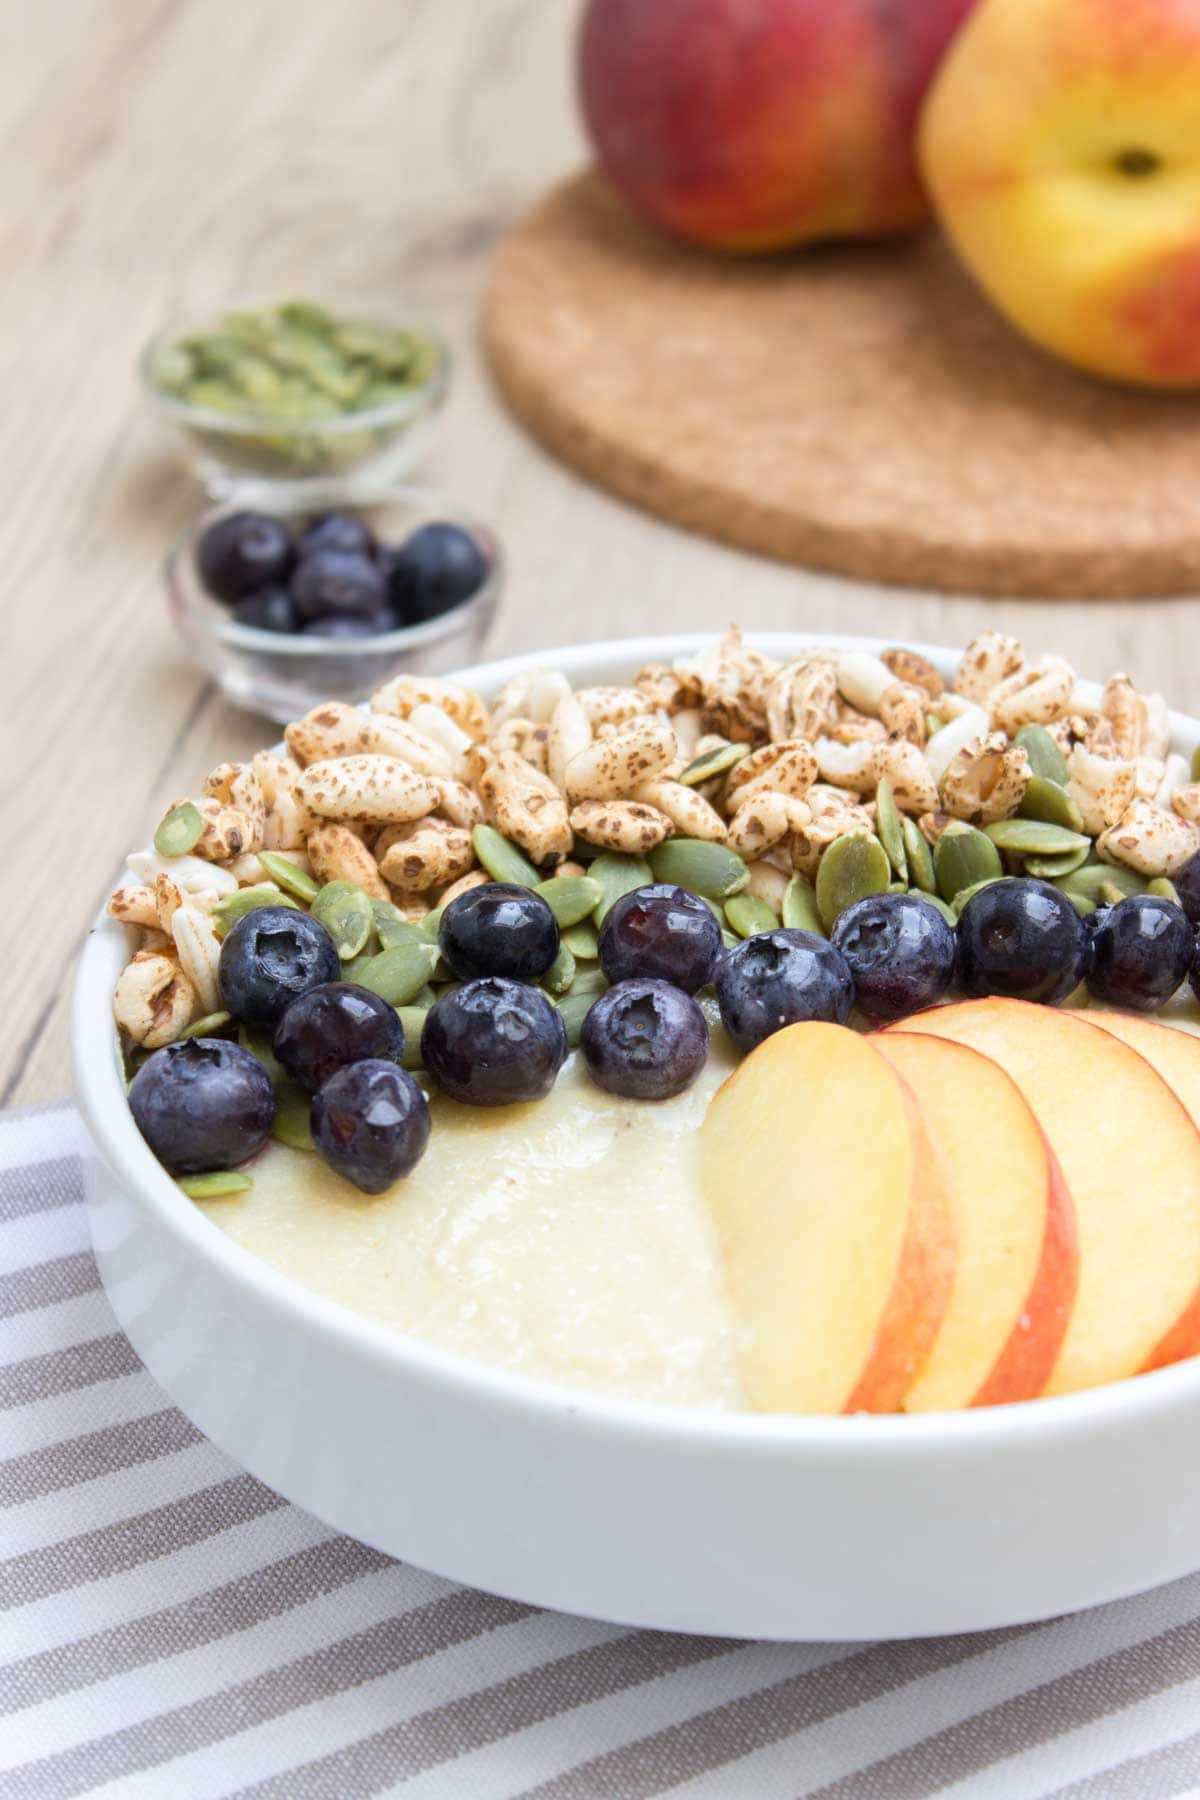 Thick, creamy and irresistible sweet Pineapple Peach Smoothie Bowl is a perfect weekend breakfast. It's packed with healthy fibers, vitamins, plant based proteins, and HEALTHY omega-3. It's an easy way to turn a healthy smoothie into a whole meal. #vegan #glutenfree #sugarfree #paleo #sugarfree #healthy #dairyfree #smoothie #breakfast #kidsfriendly #snack #whole30 | natalieshealth.com